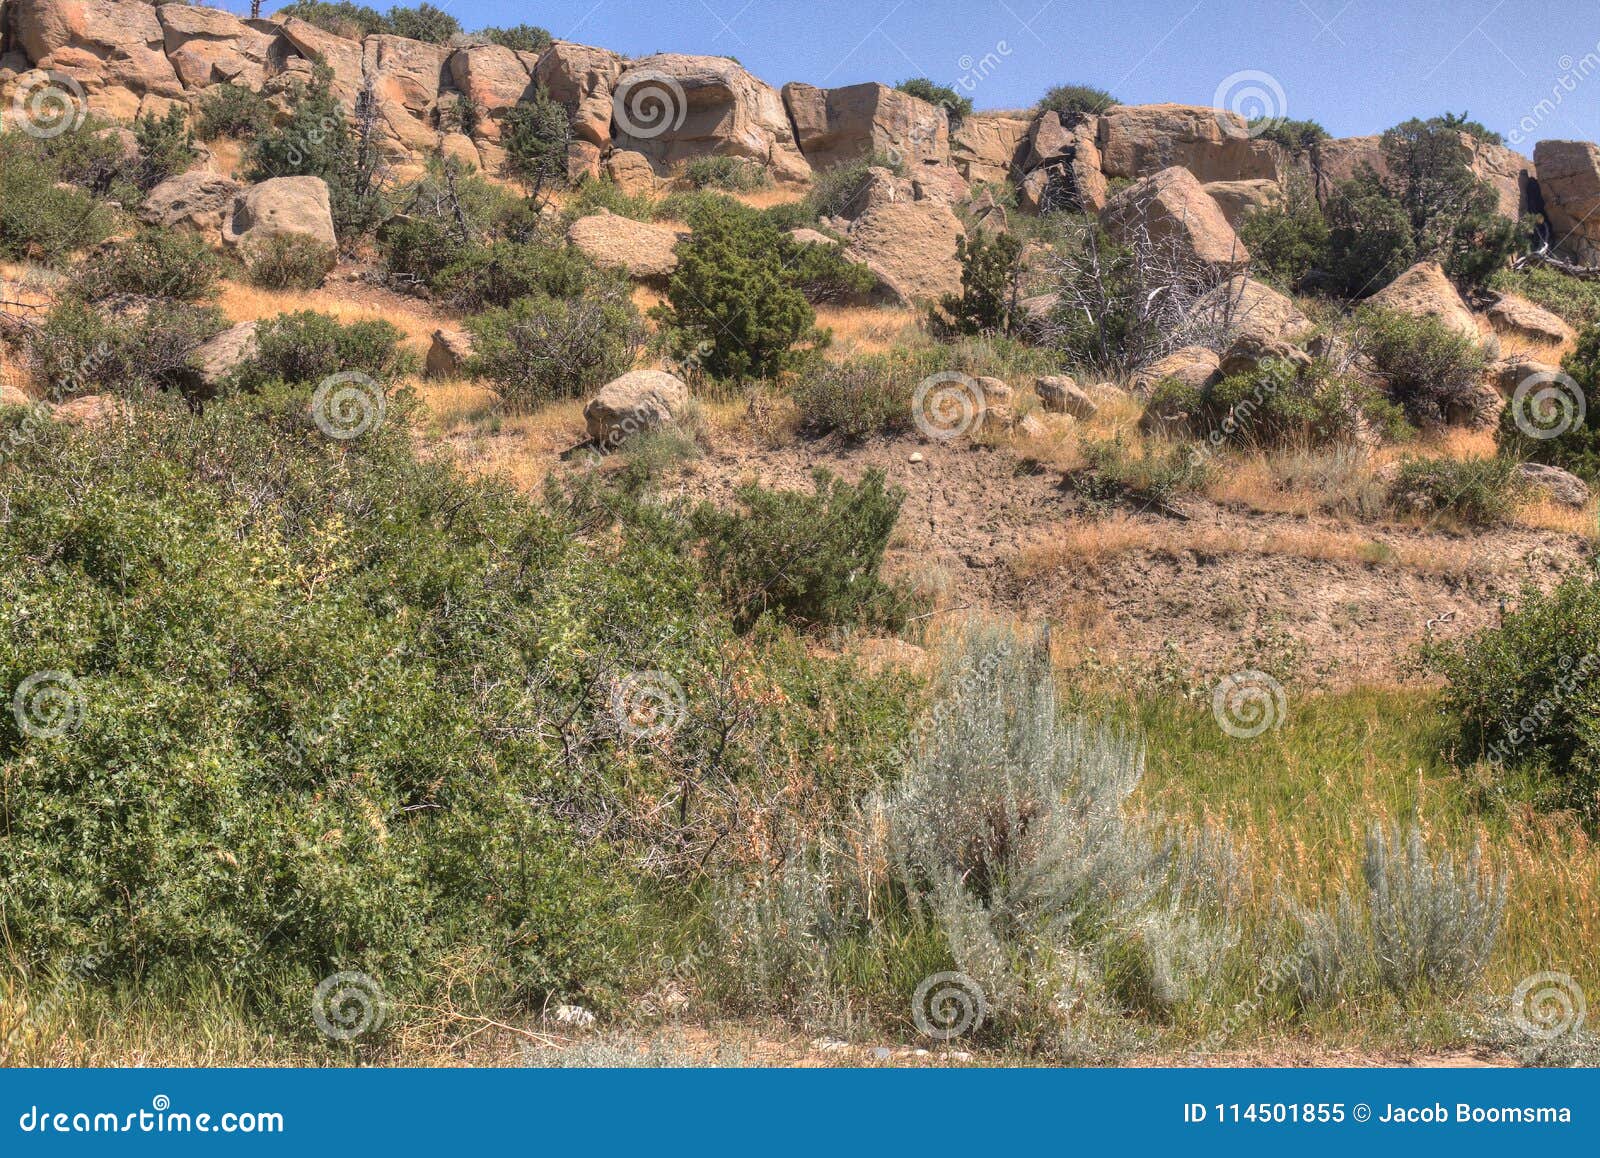 pictograph state park outside of billings, montana in summer